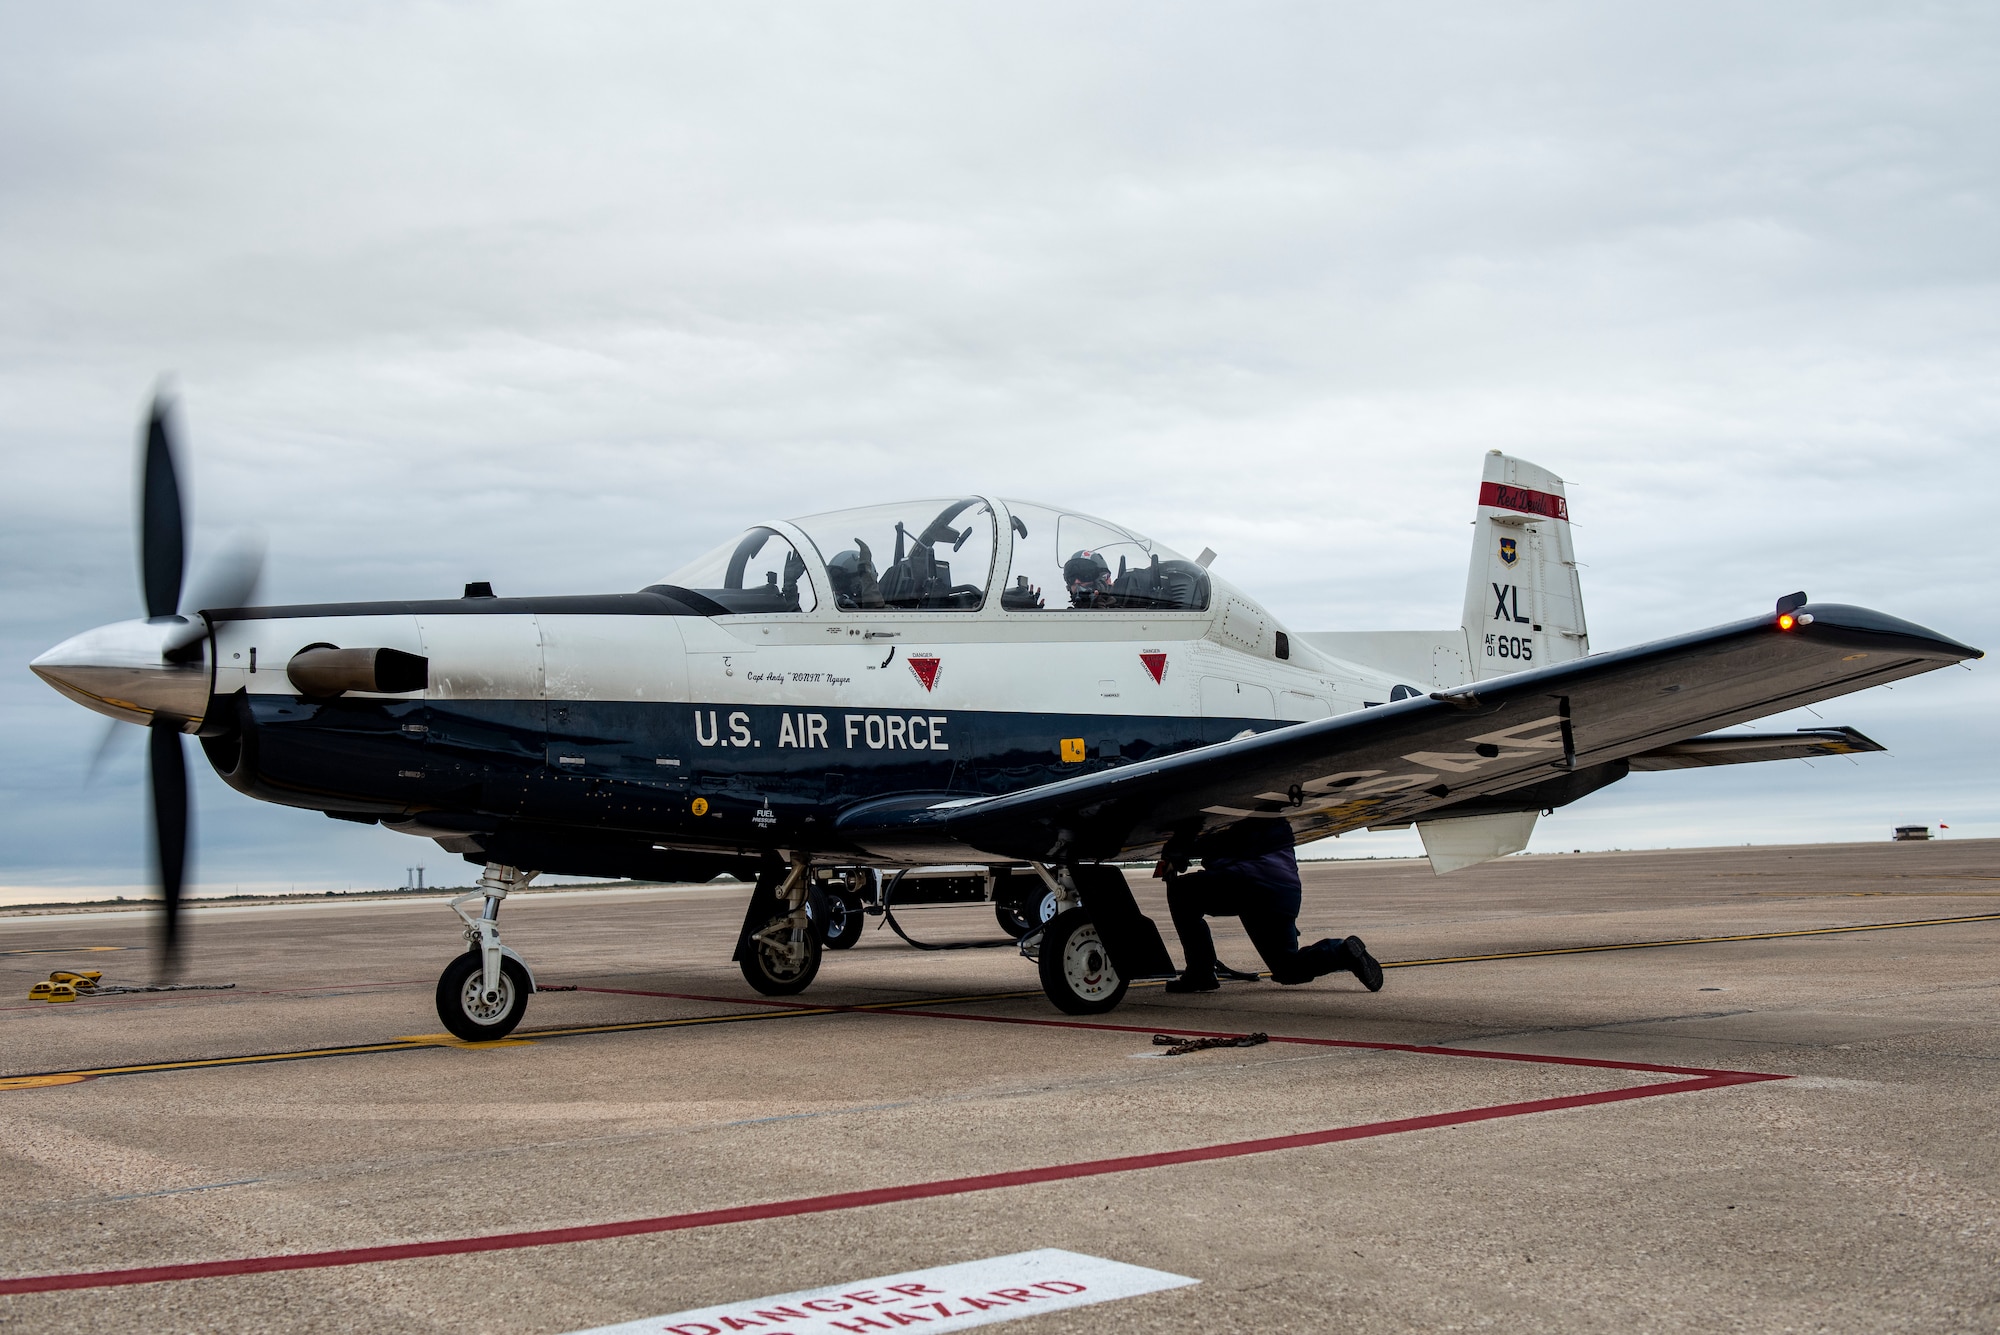 2nd Lt. Rosaria, 47th Flying Training Wing international student pilot, Capt. Curtis Billig, 434th Flying Training Squadron flight commander, waits for the signal to taxi off and go for takeoff.  The Texan II T-6 is the first aircraft that all pilots fly at the beginning of their pilot training journey here at Laughlin Air Force Base. (These photos have been edited to hide the last name of the student)  (U.S. Air Force photo by Senior Airman David Phaff)